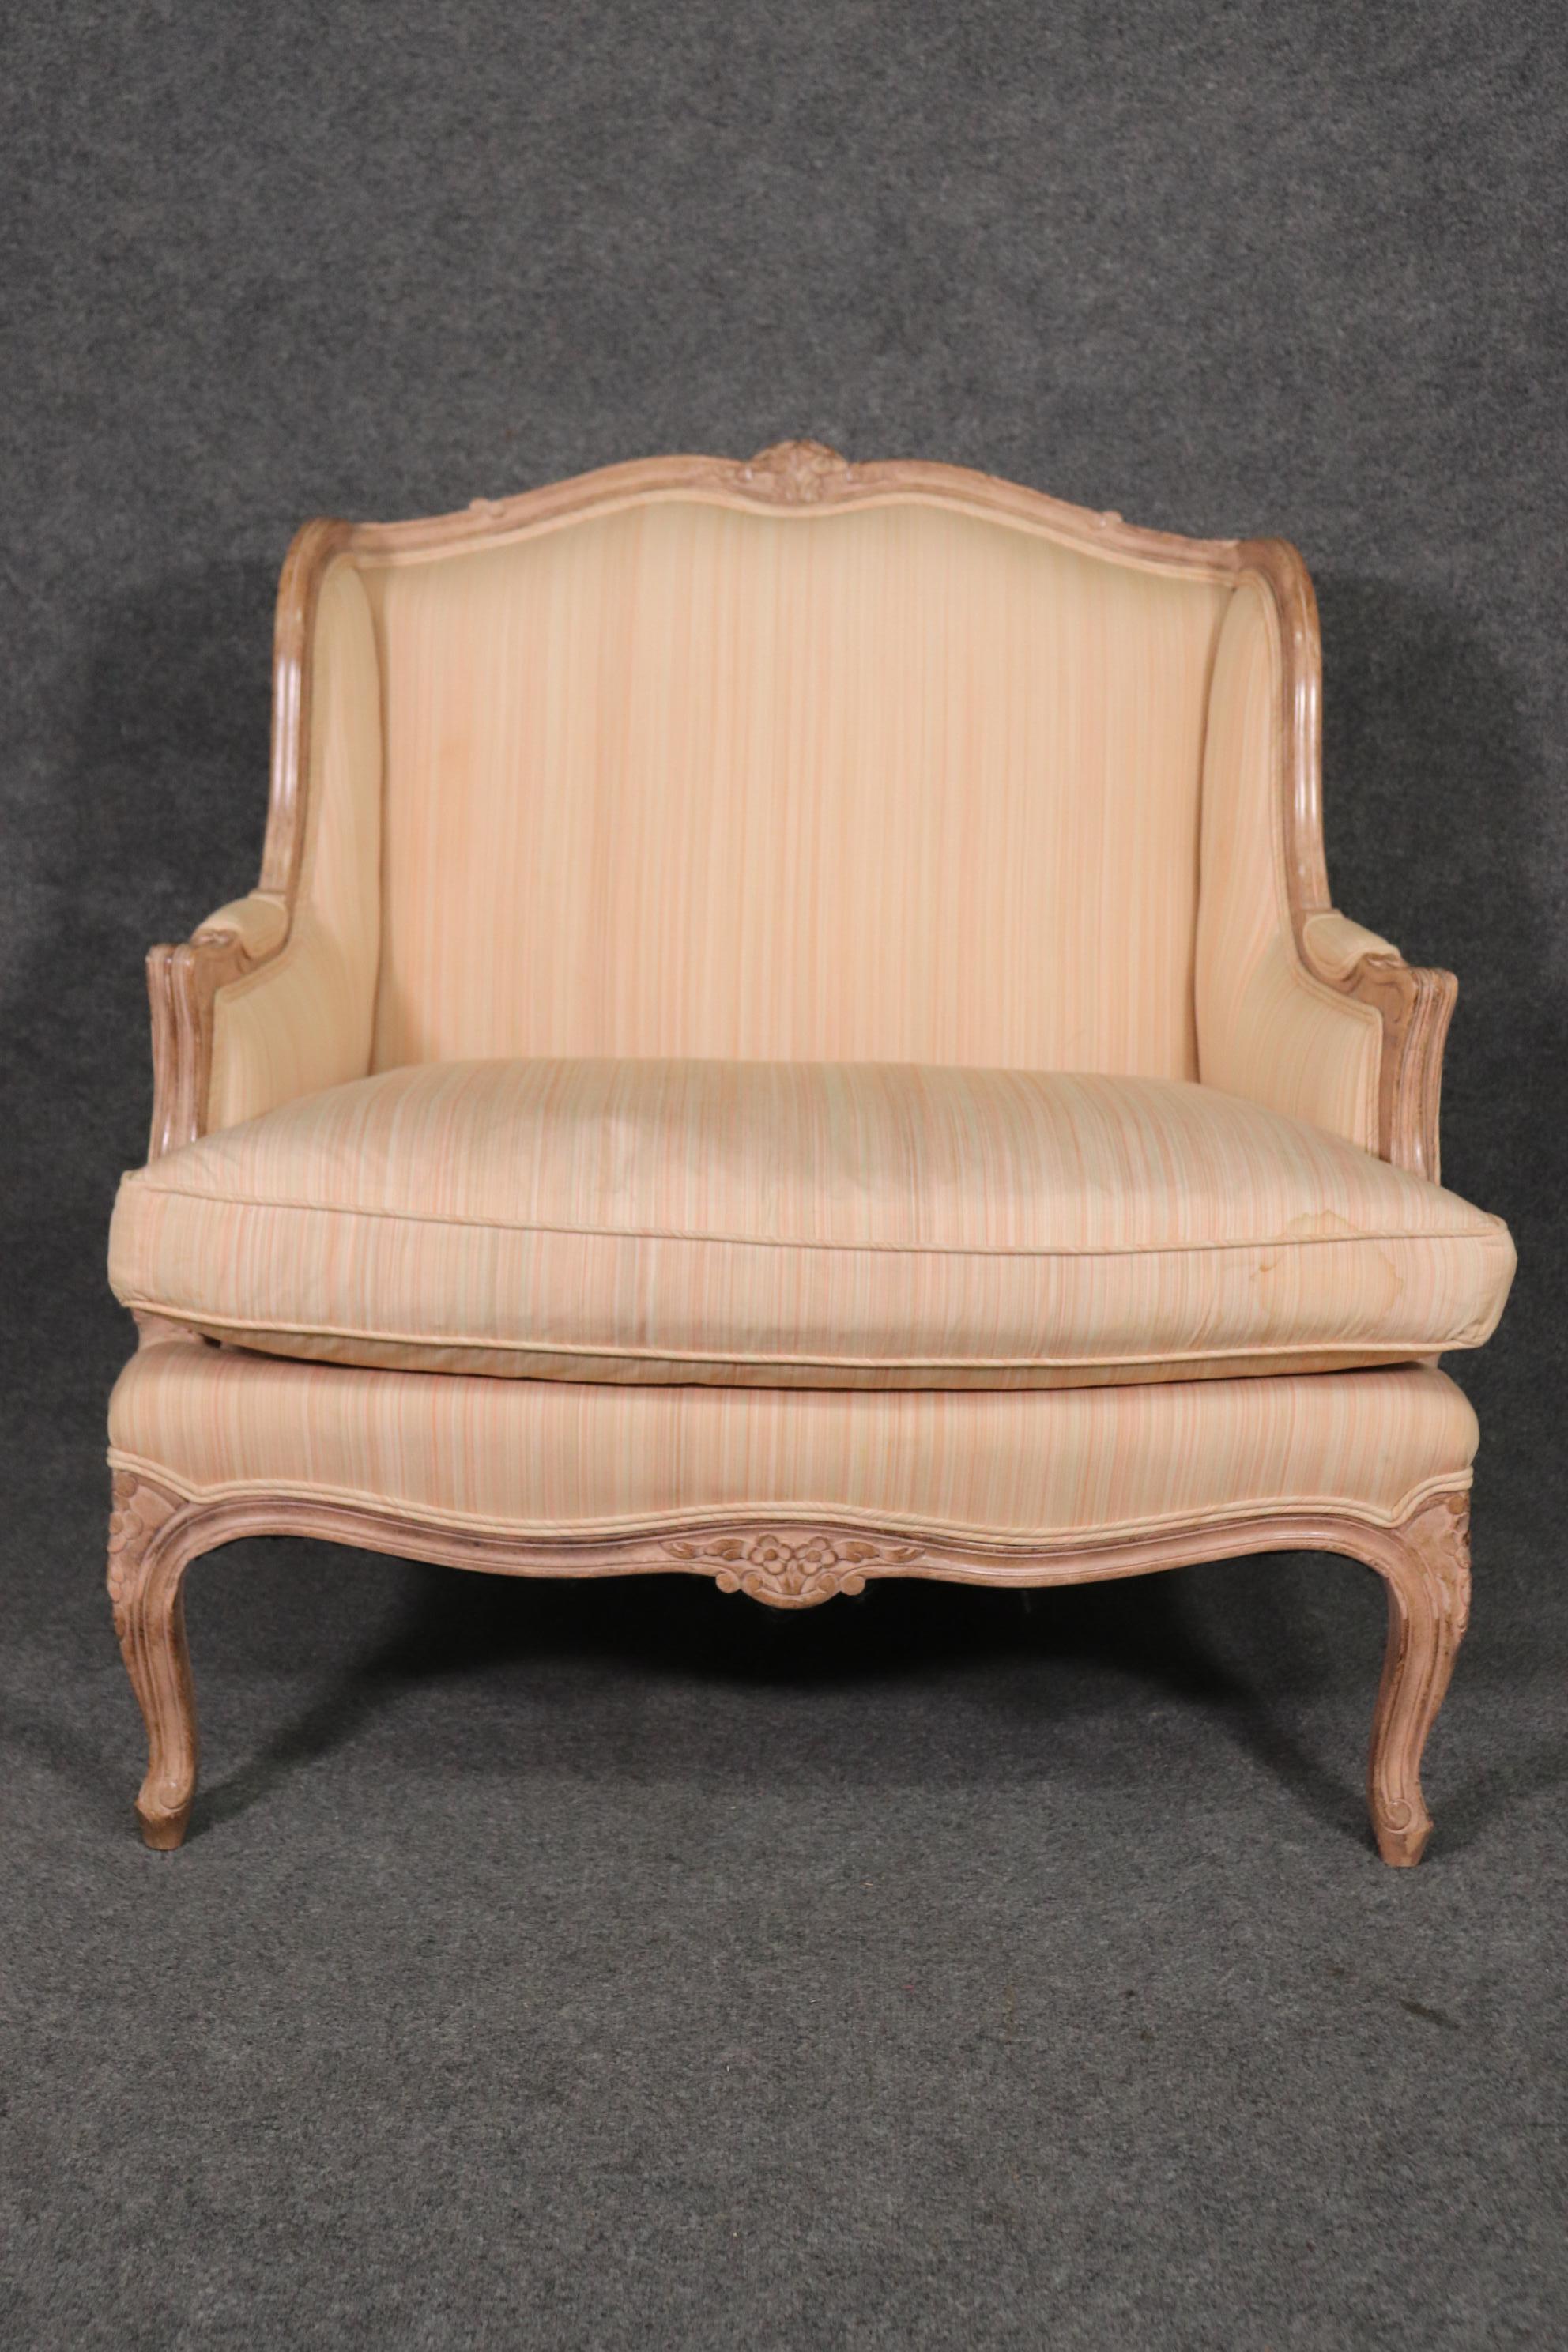 French Provincial John Stuart Louis XV Style Painted Bergere Chair with Ottoman, circa 1970